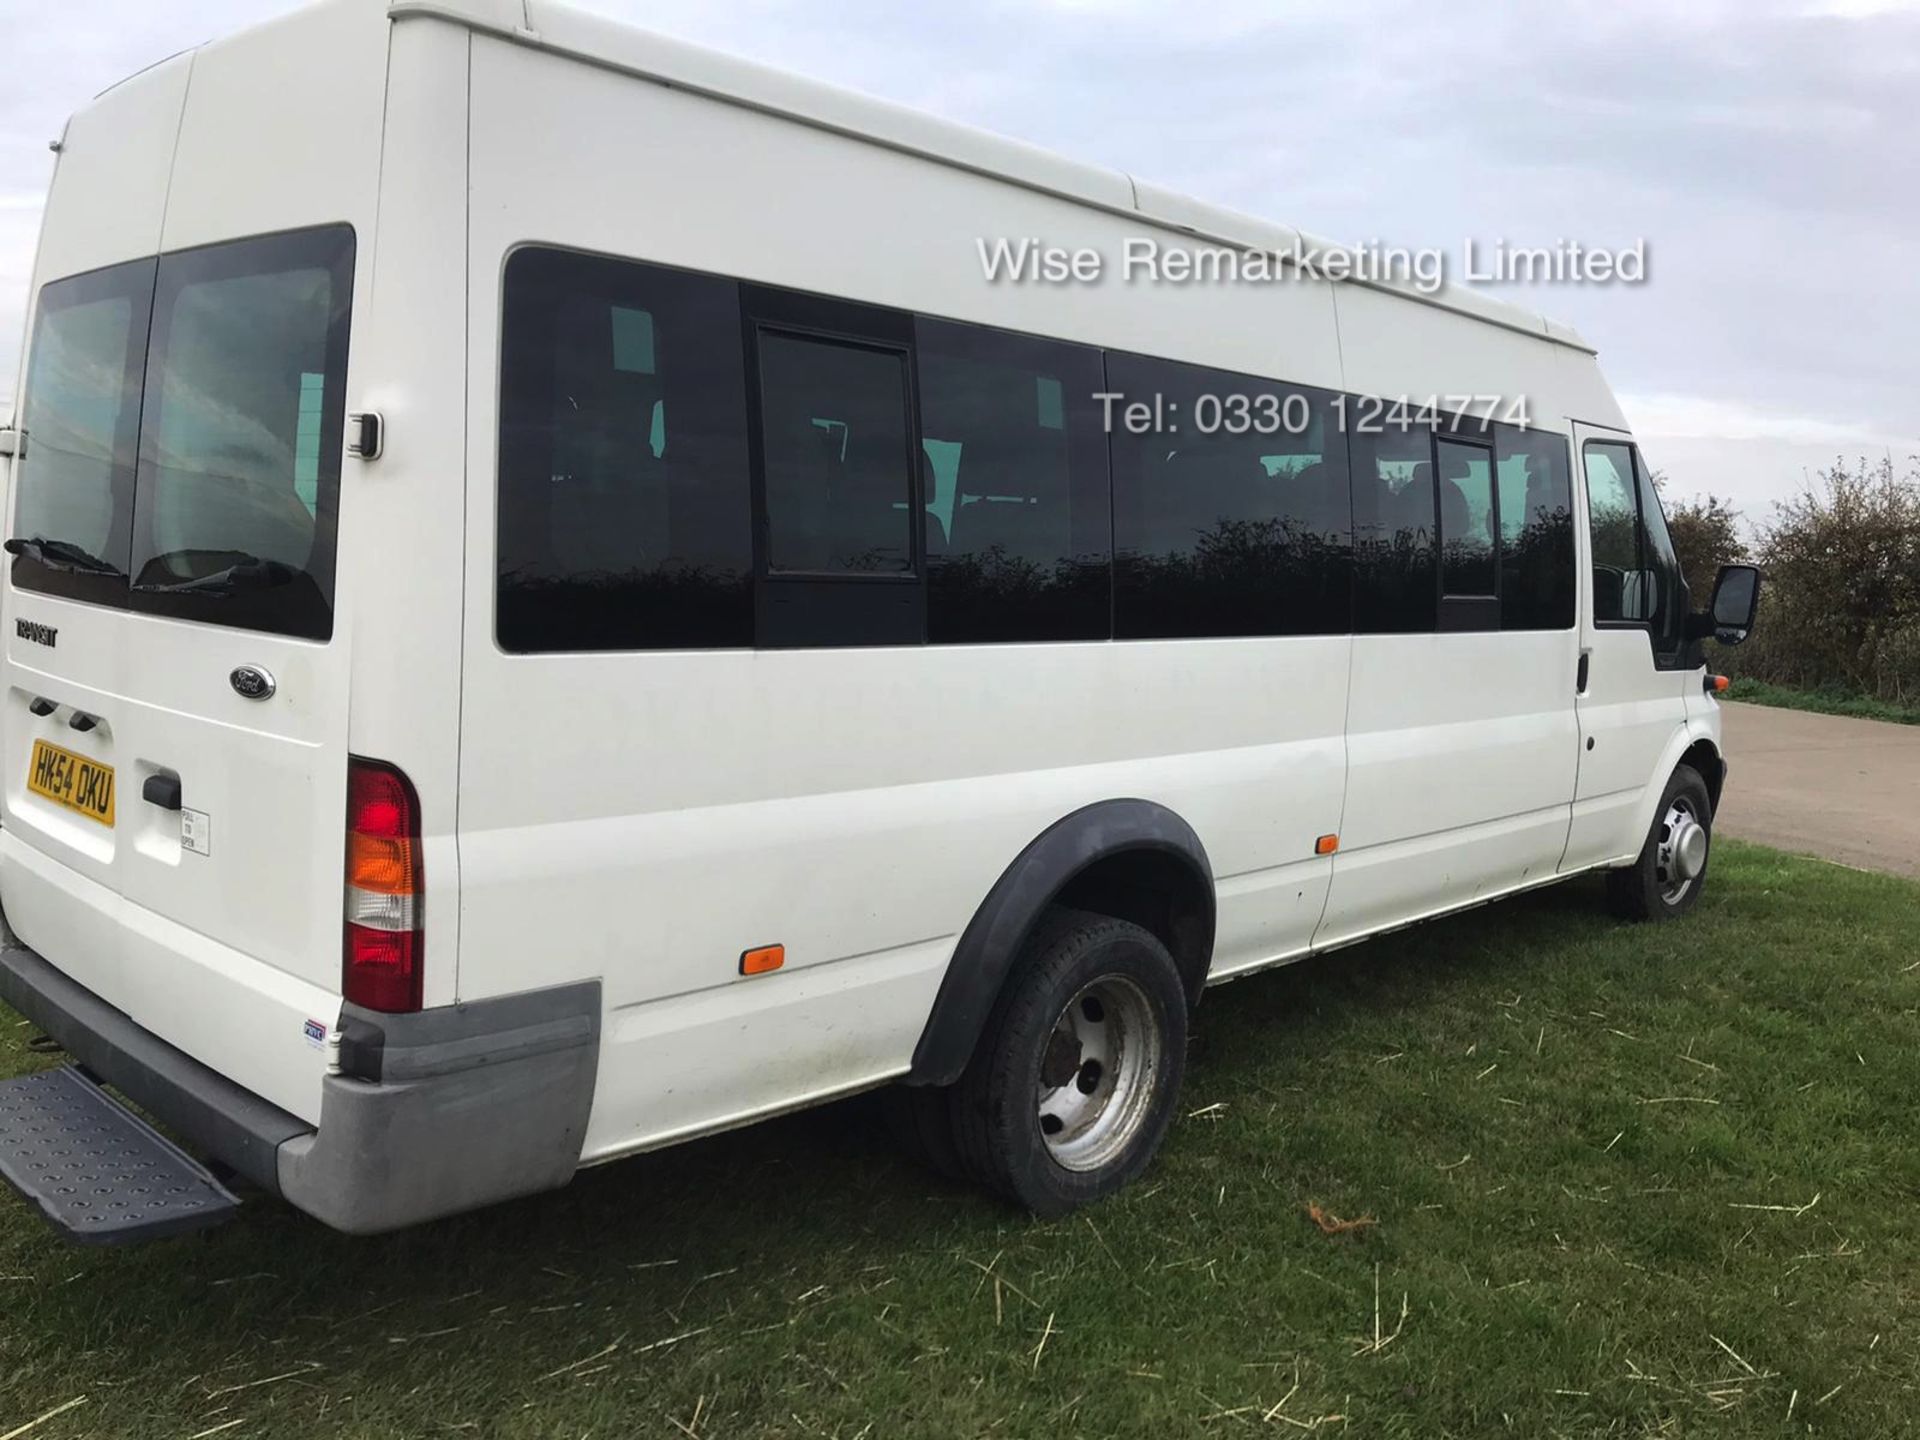 Ford Transit Minibus 2.4l (17 Seater) - 2005 Model - Service History - 1 Keeper - Only 31k Miles - Image 4 of 22